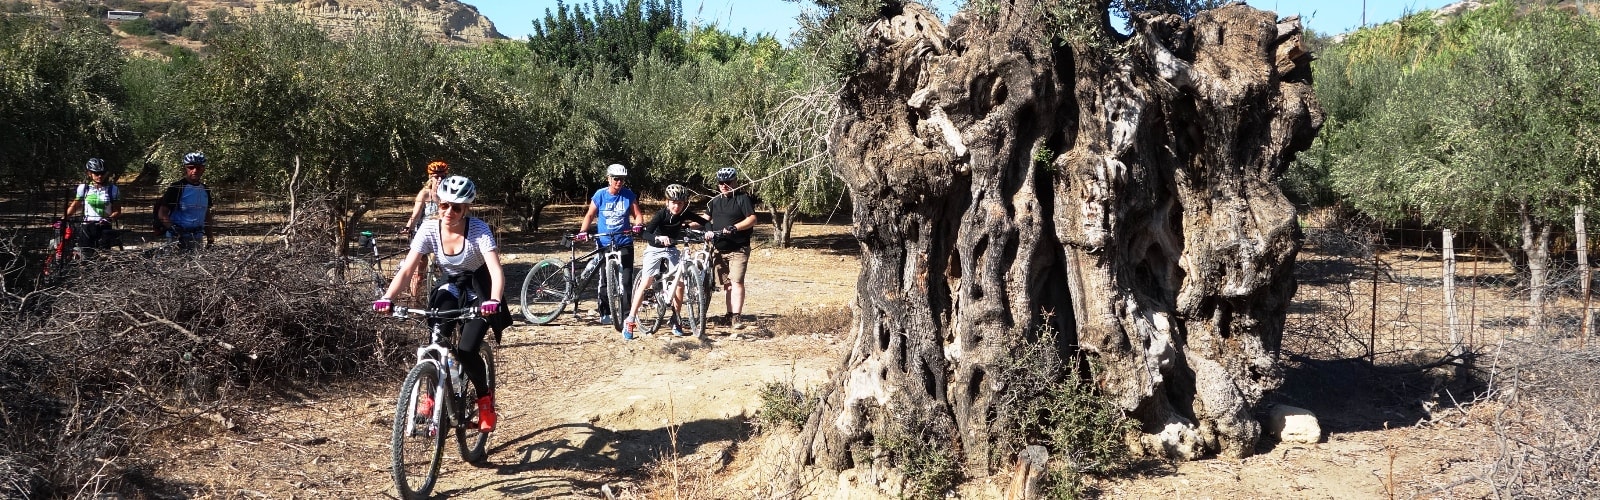 very-old-olive-tree-and-a-very-beautiful-bike-girl-crete-min